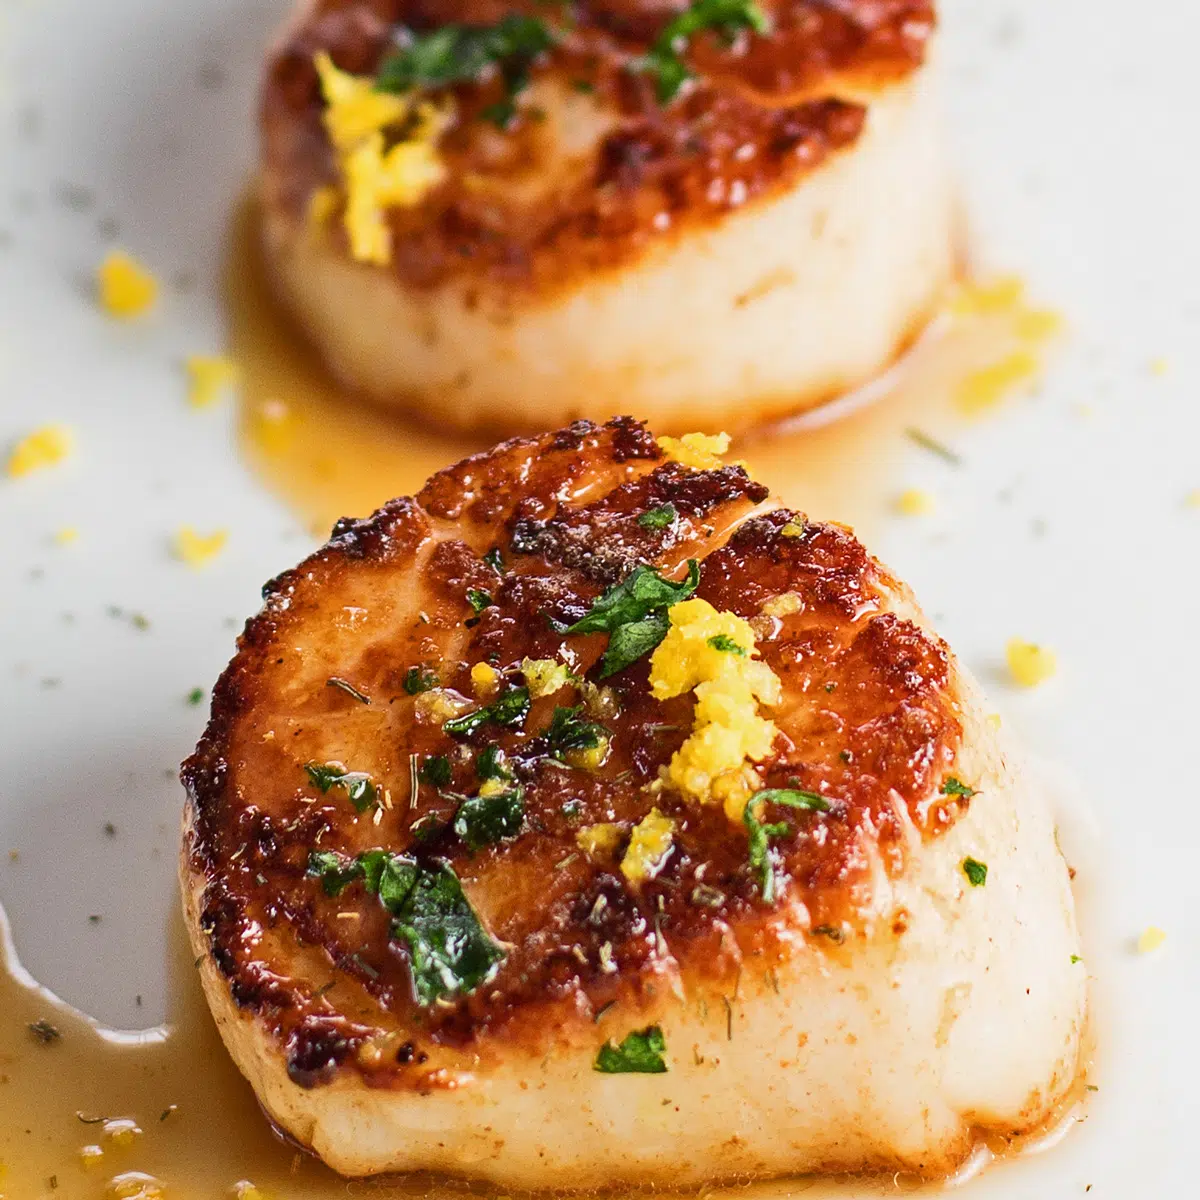 What to serve with scallops, the 33 best side dishes, appetizers, and more.